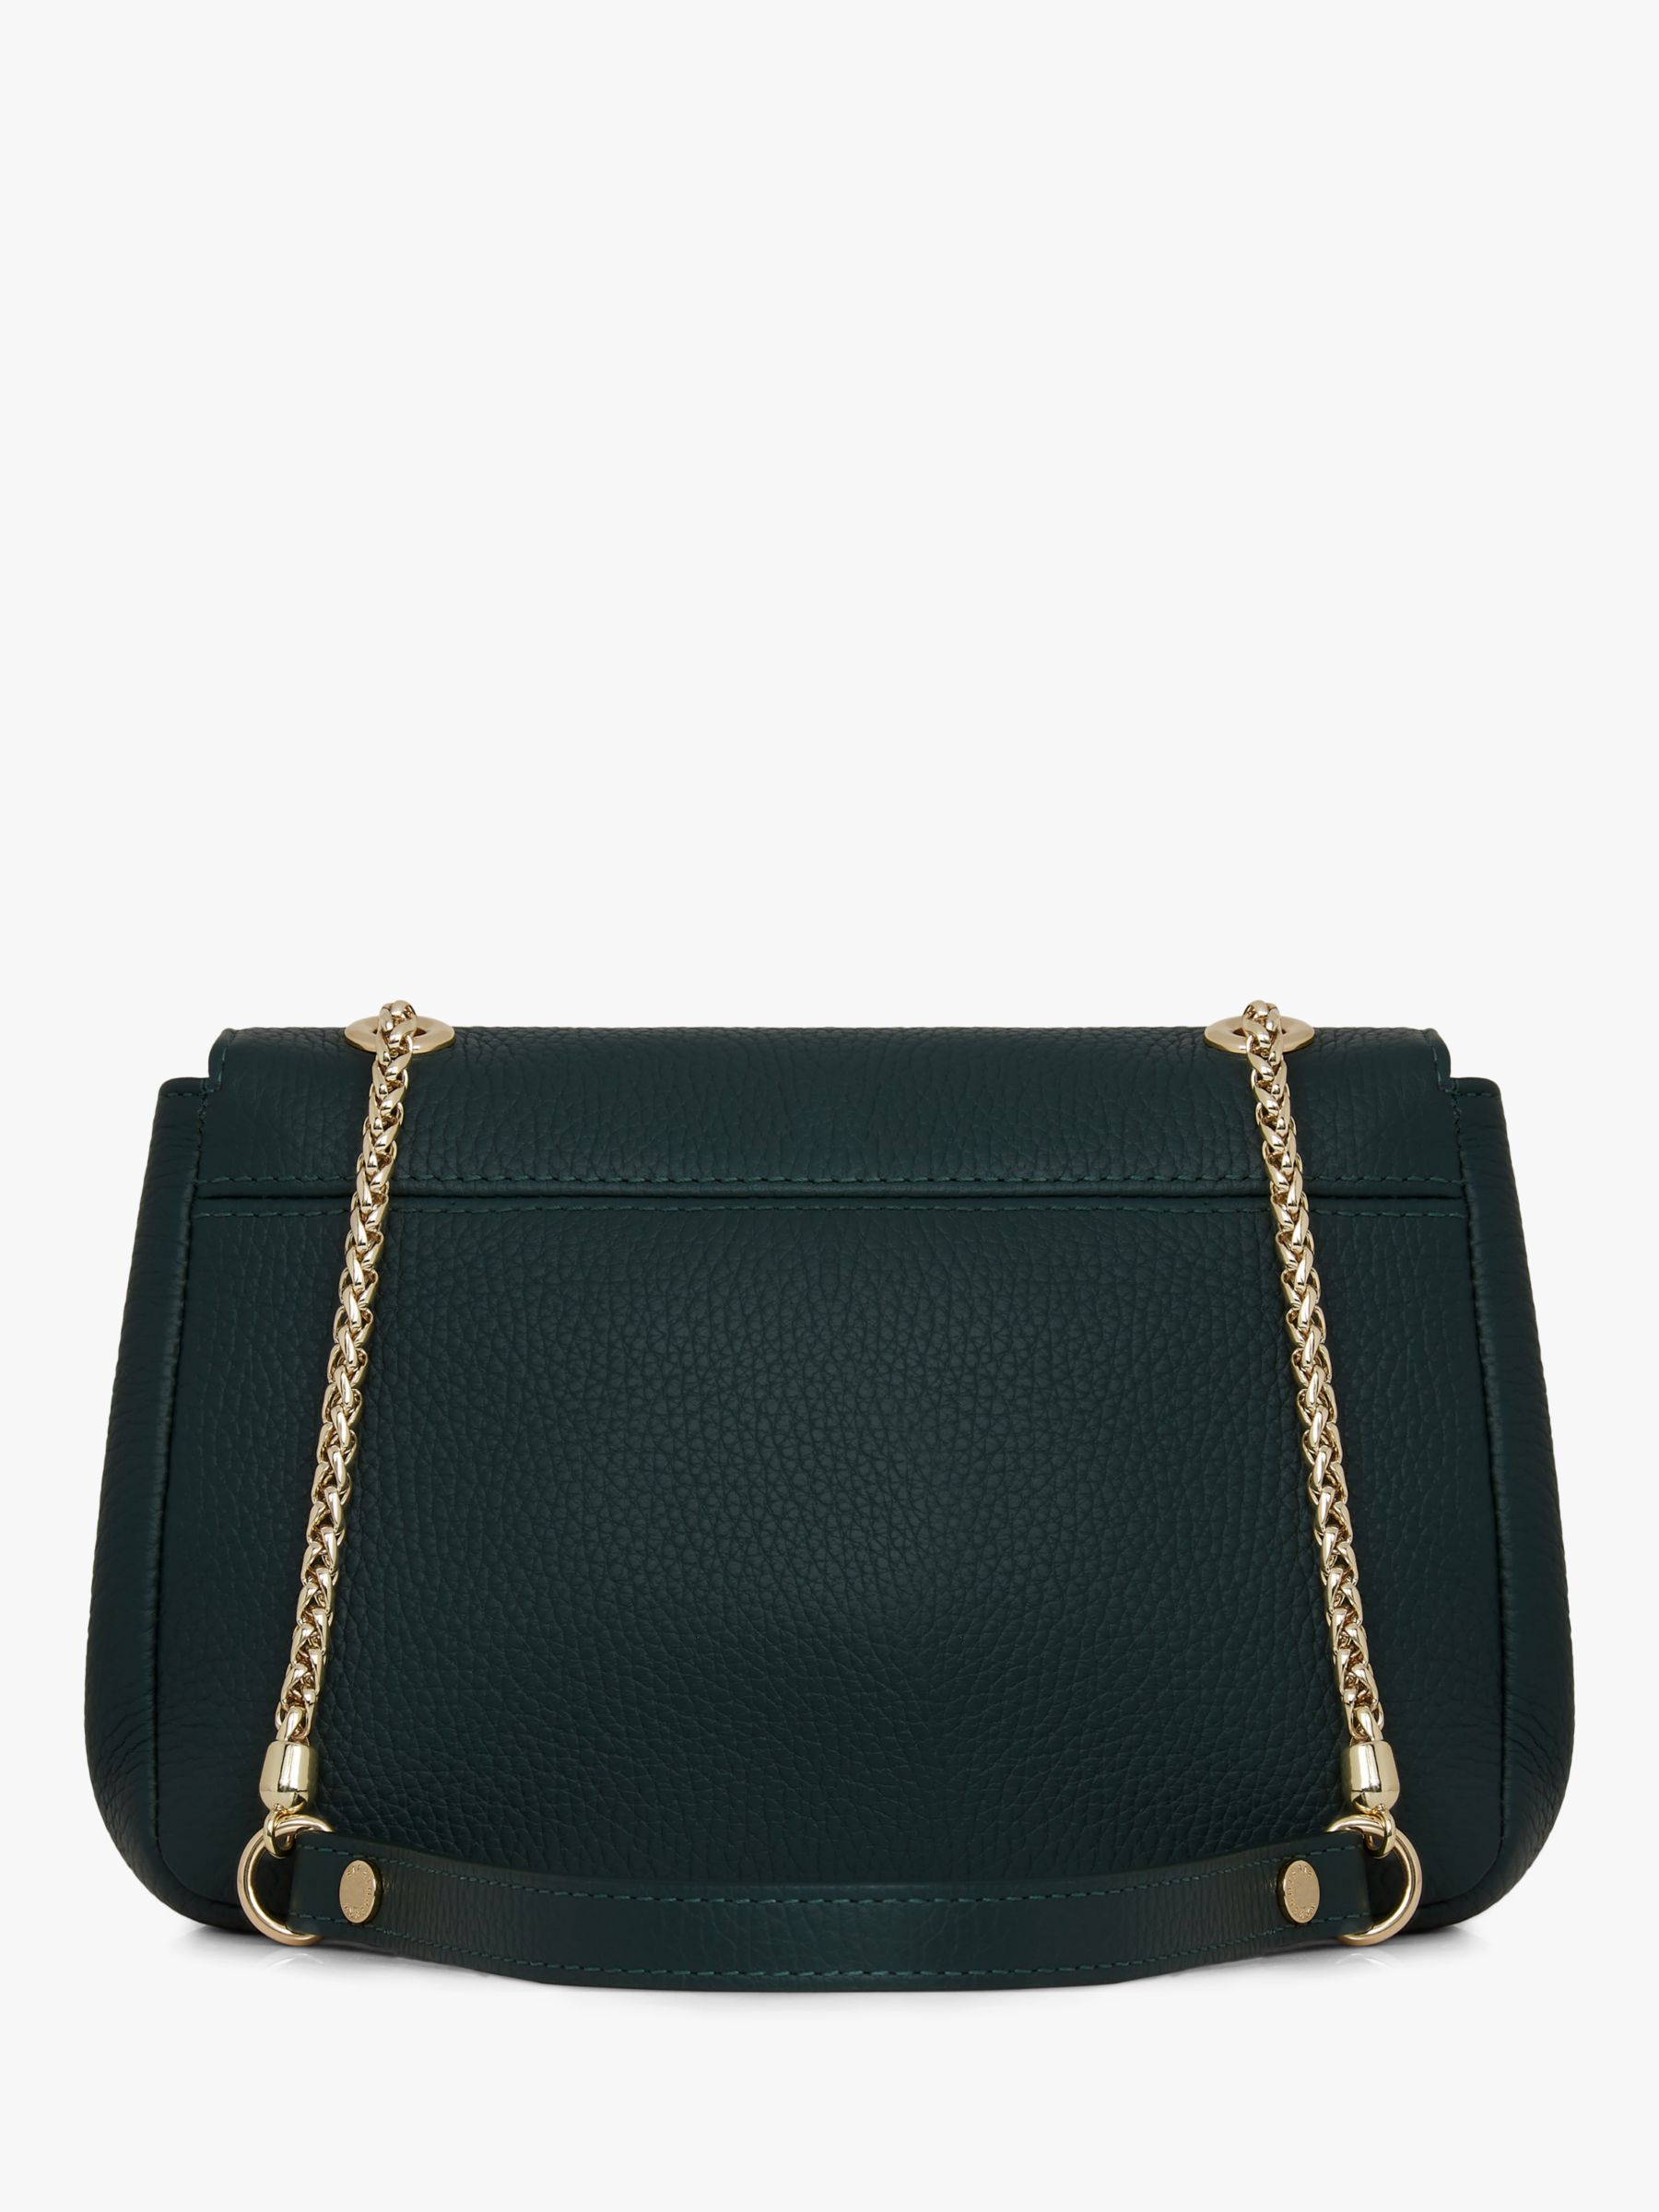 Strathberry East/West Chain Strap Mini Leather Cross Body Bag, Bottle ...